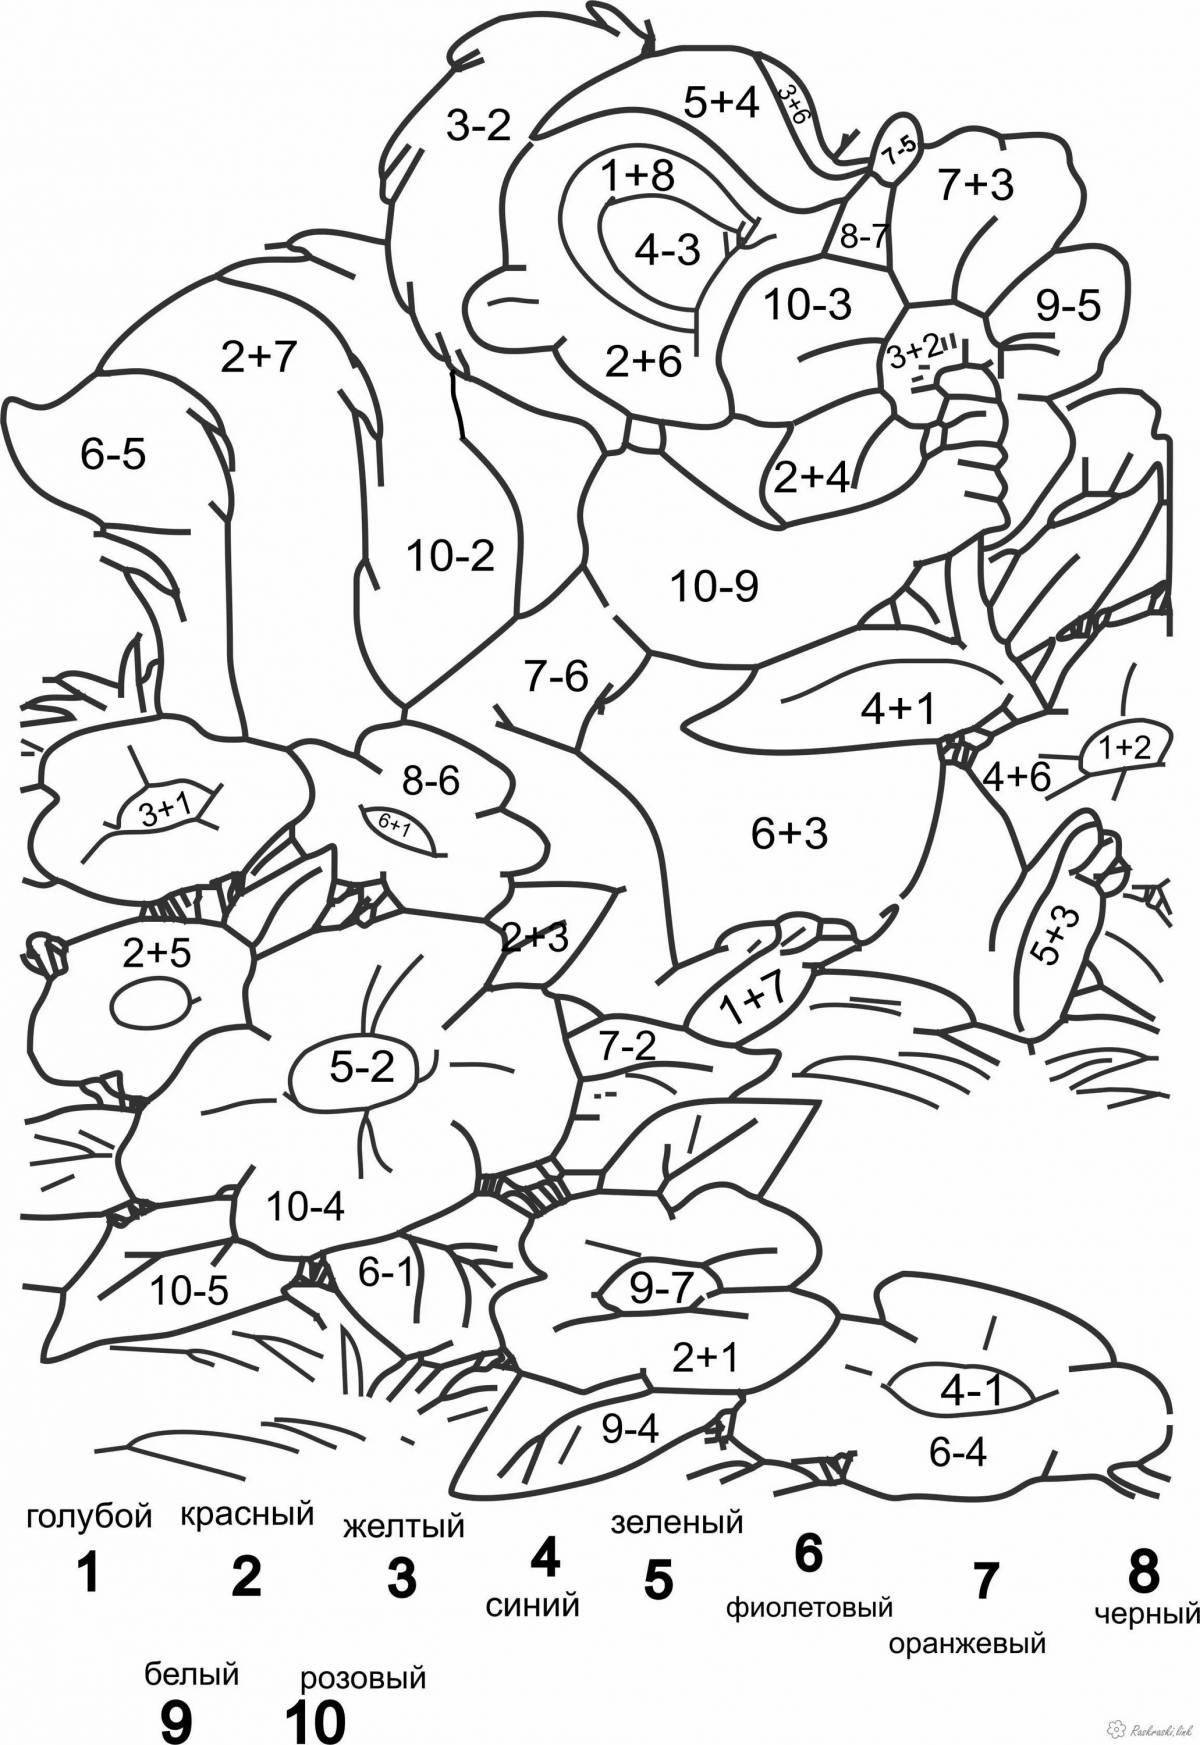 Vivid math coloring pages for kids 6-7 years old